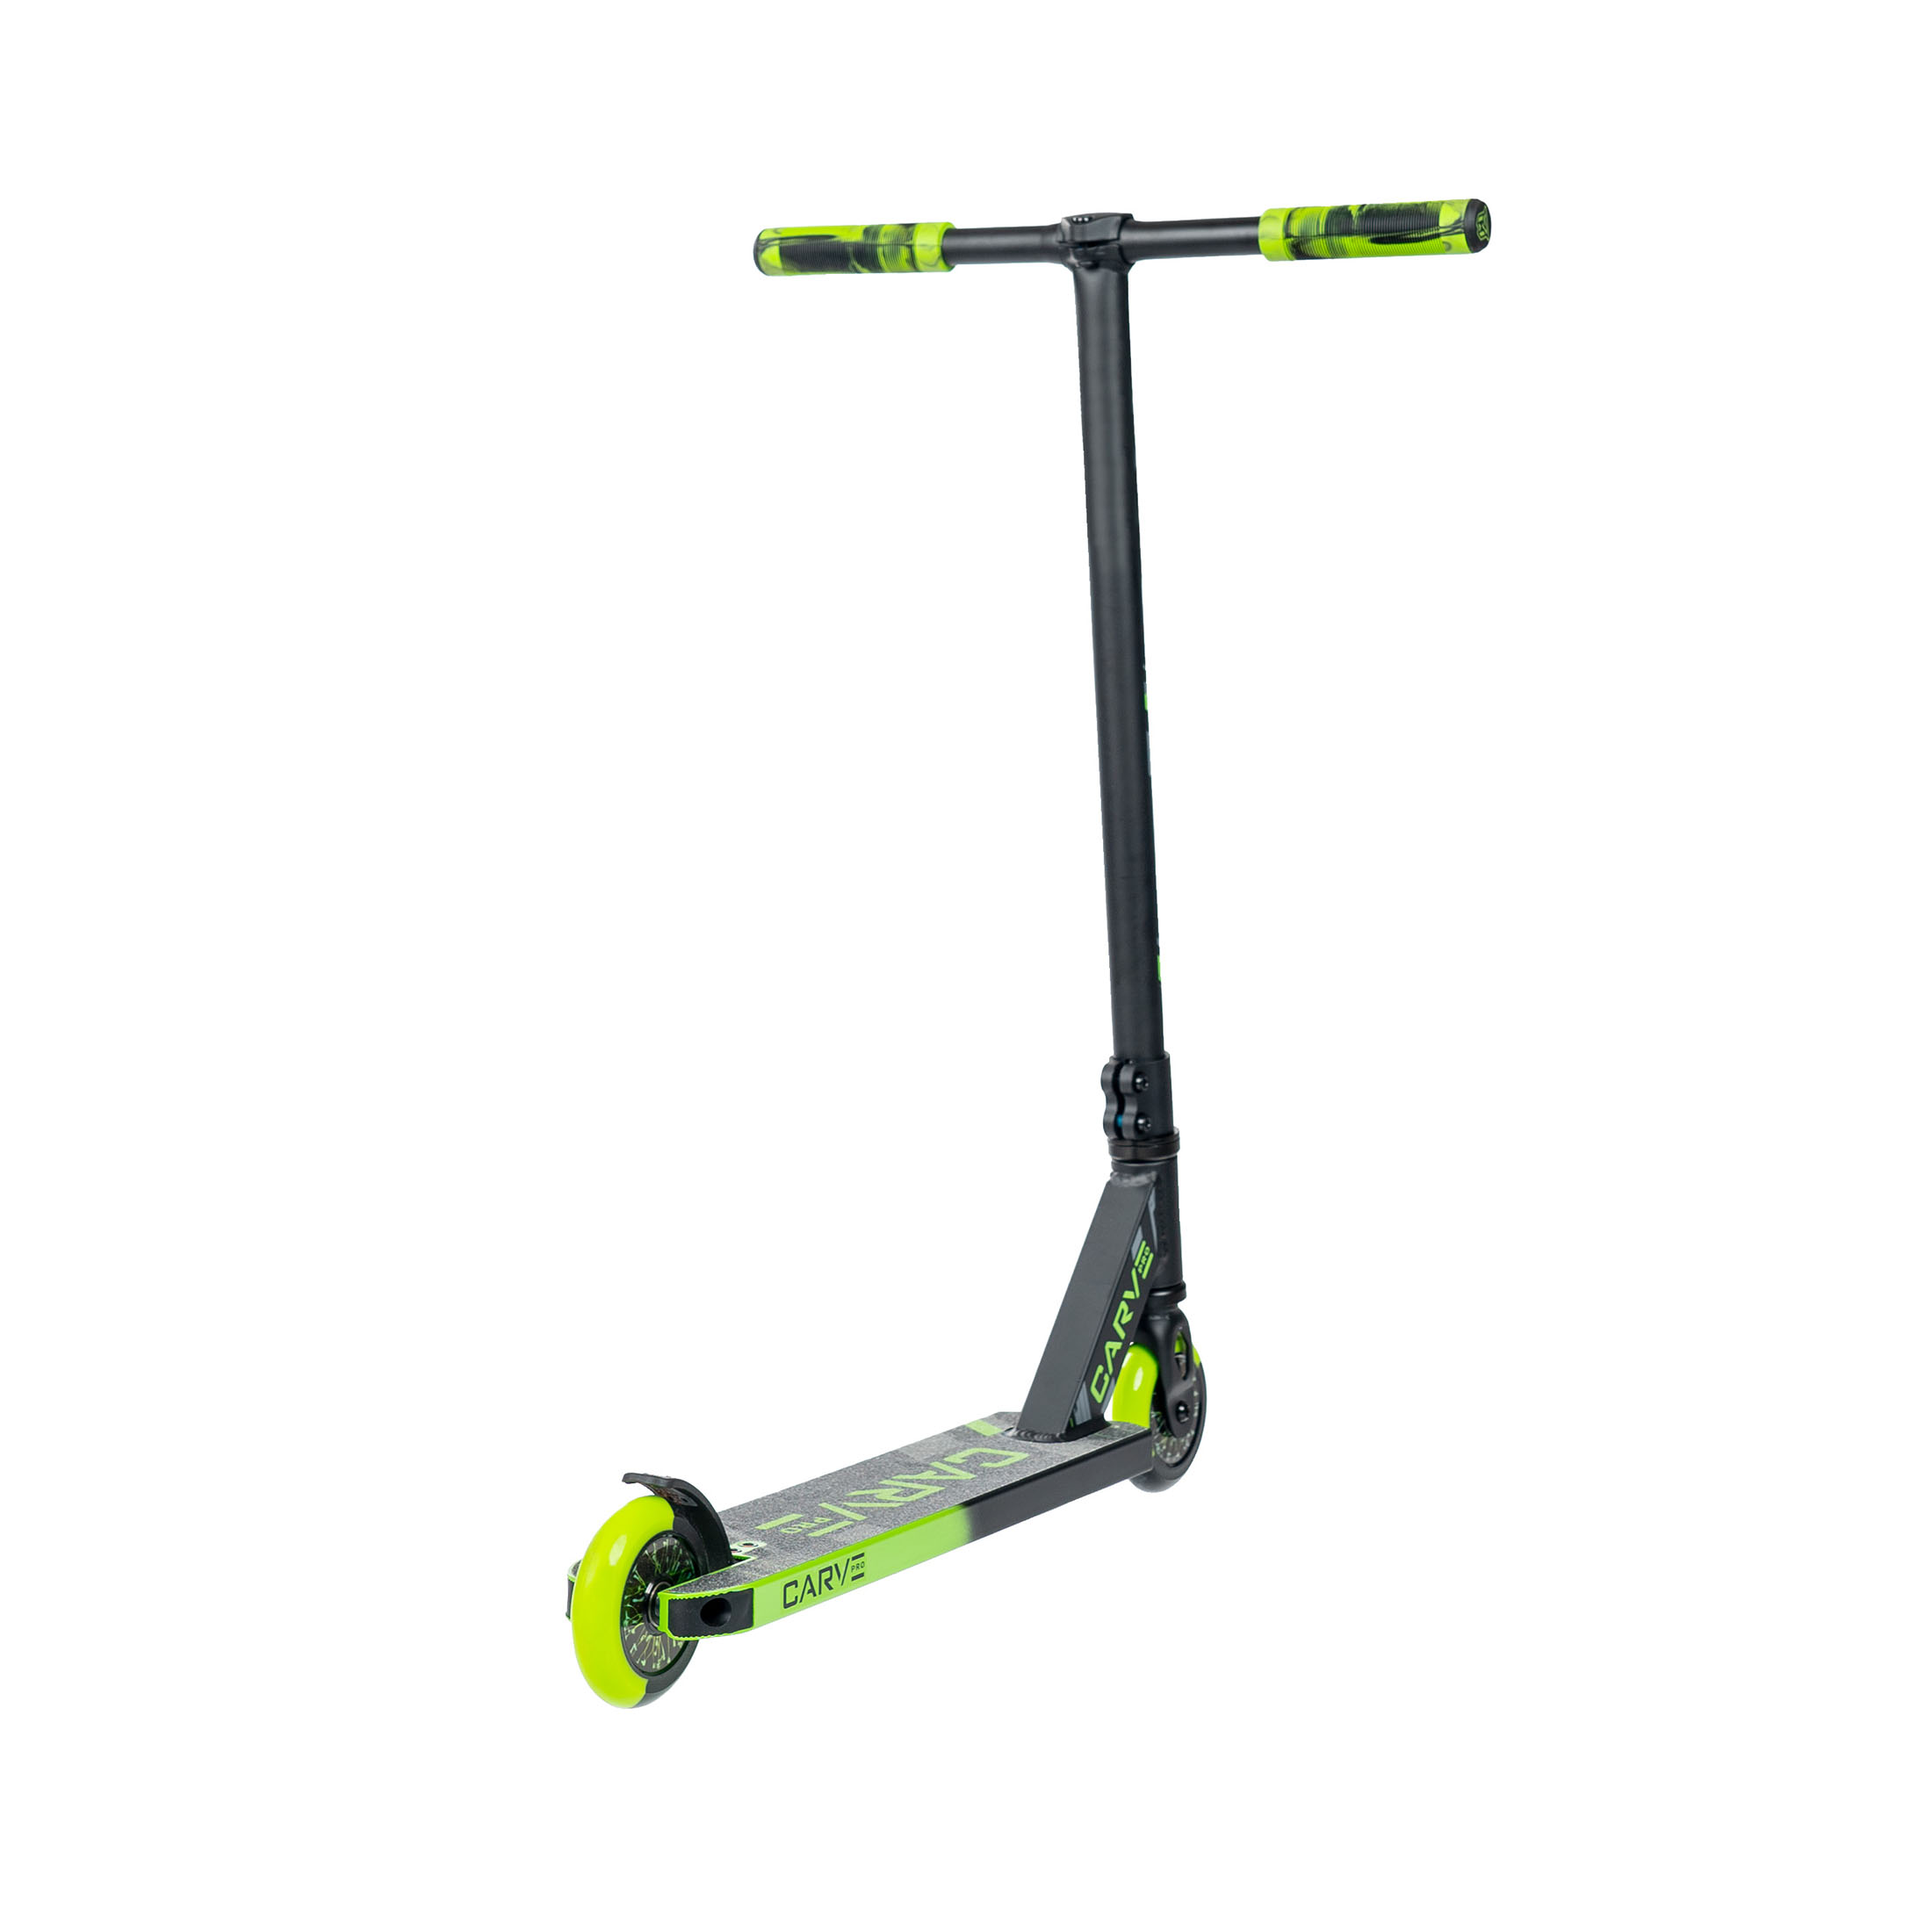 Madd Gear Carve Pro Freestyle Stunt Scooter - Strong Lightweight Aluminum  Deck for Beginner 6 Yrs +